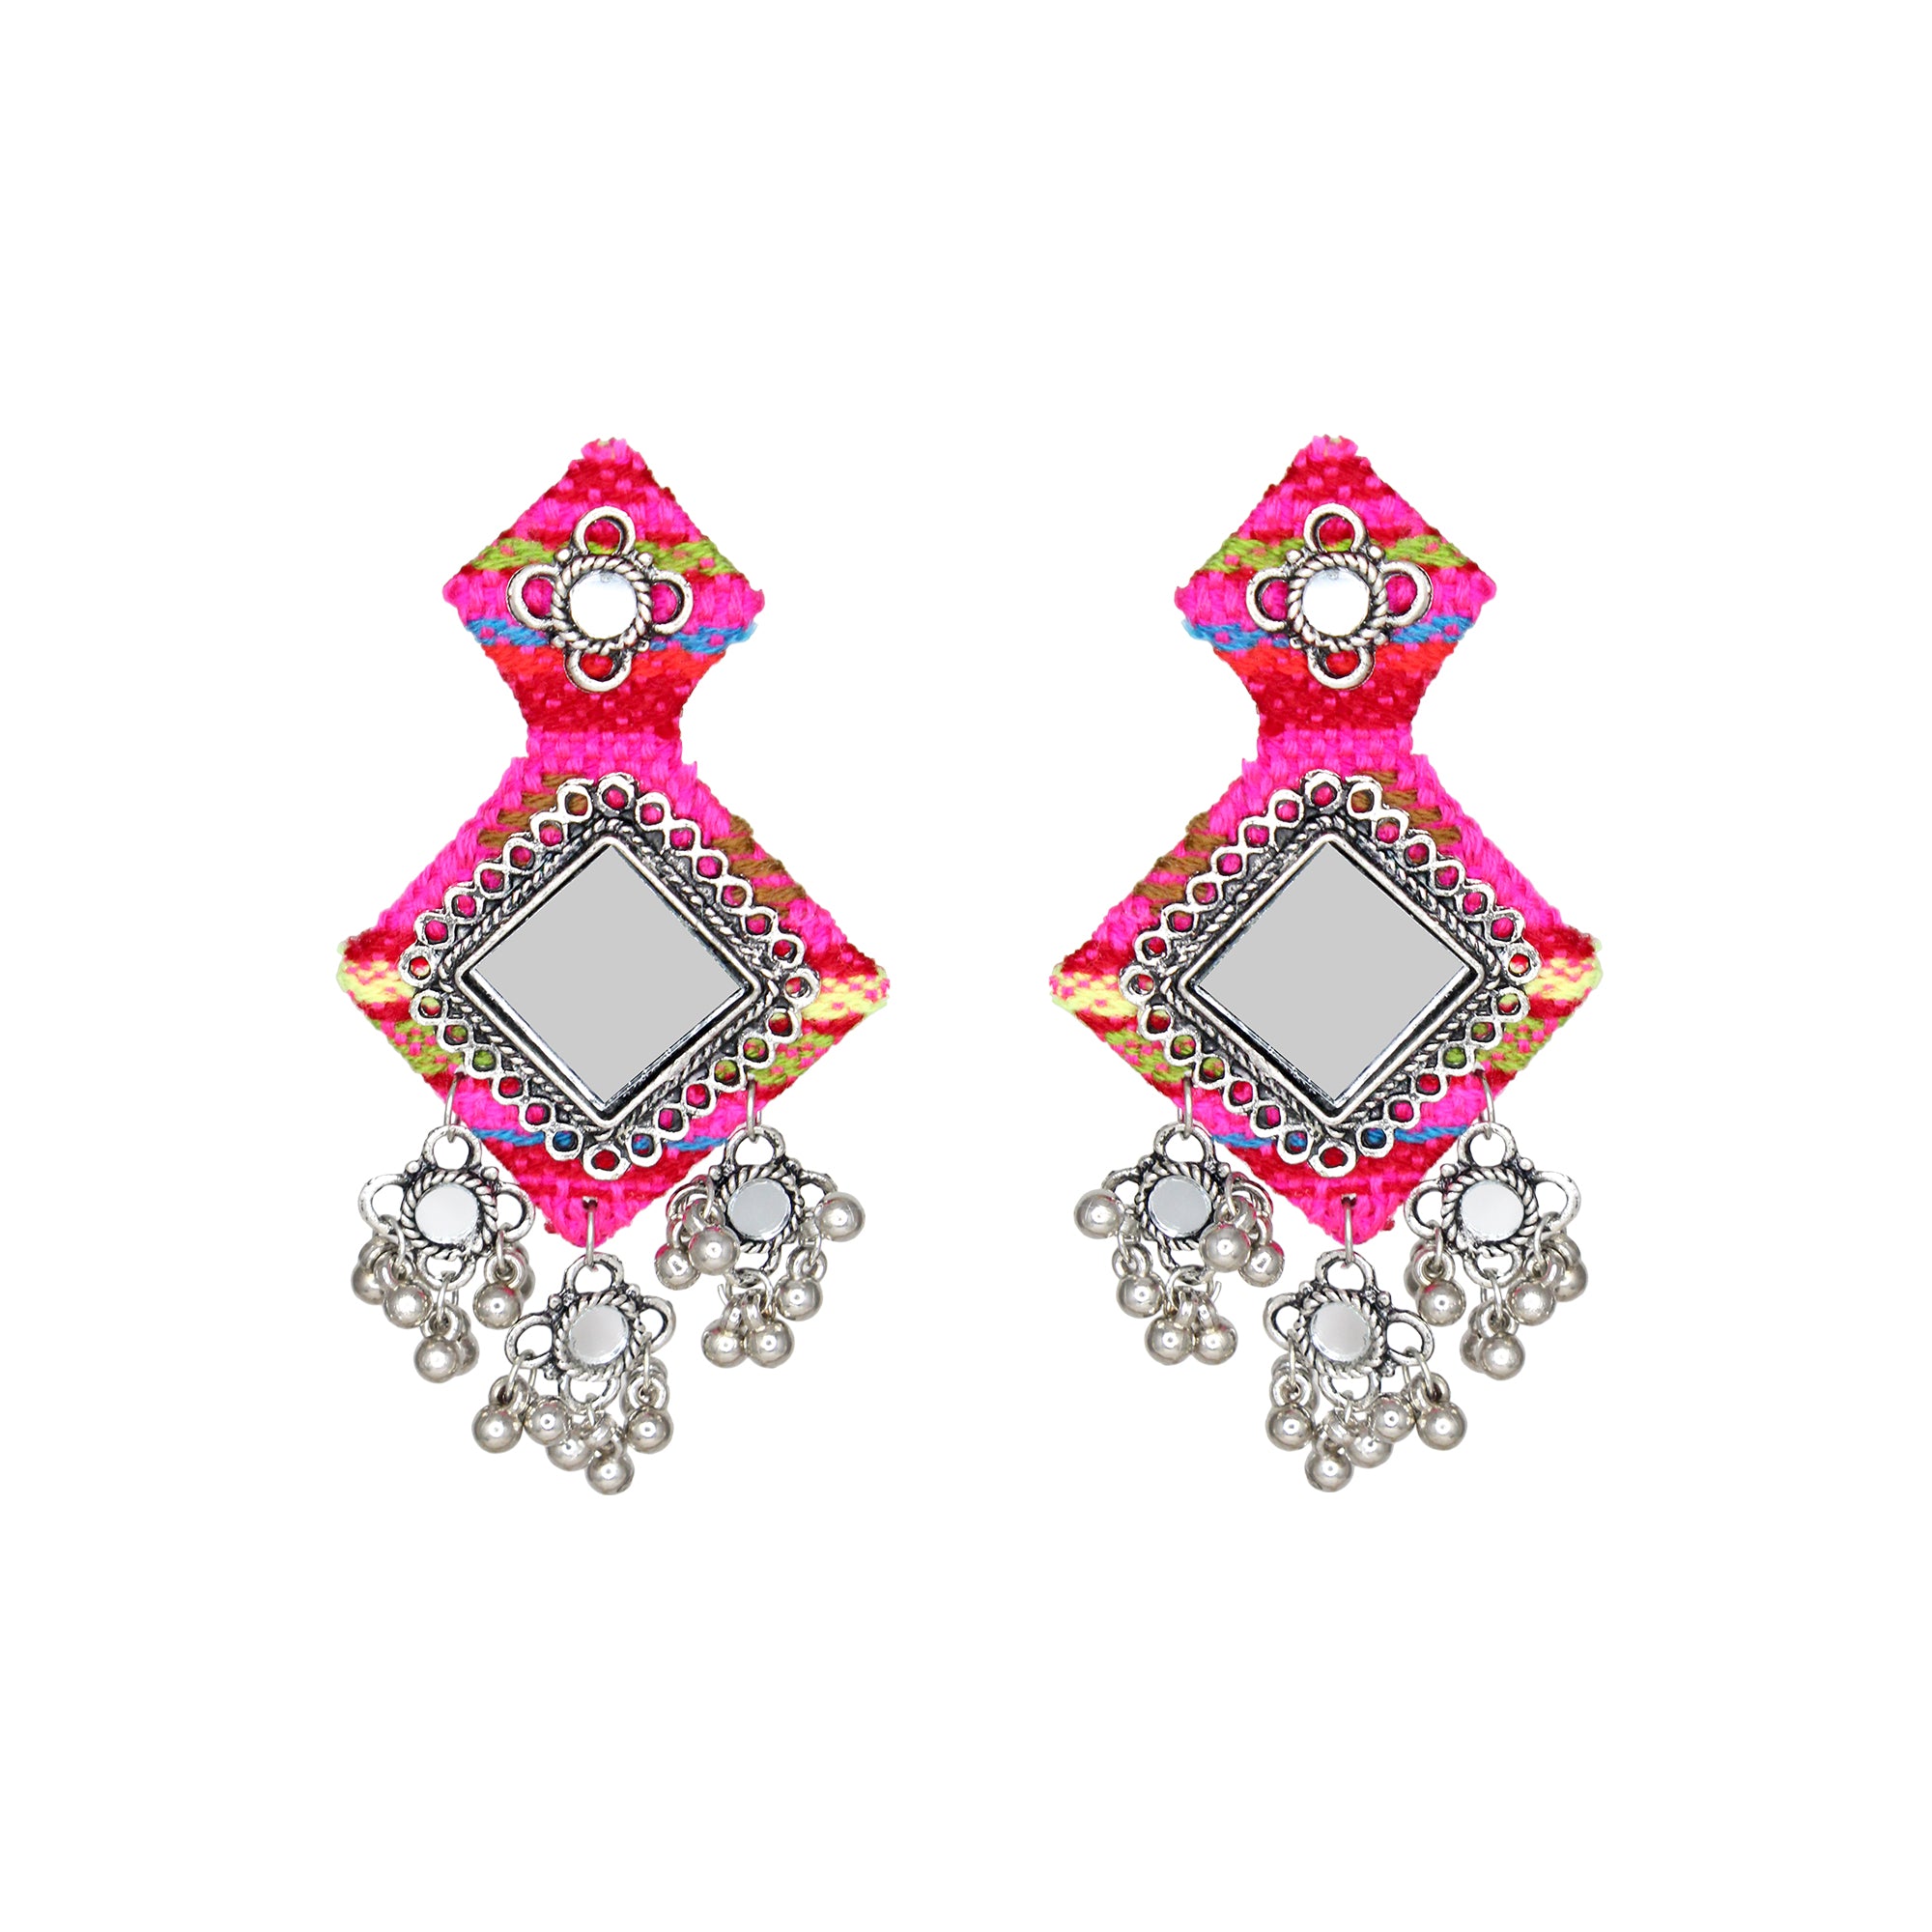 Handmade Pink Mirror Work Fabric Earrings With Silver Motifs For Women